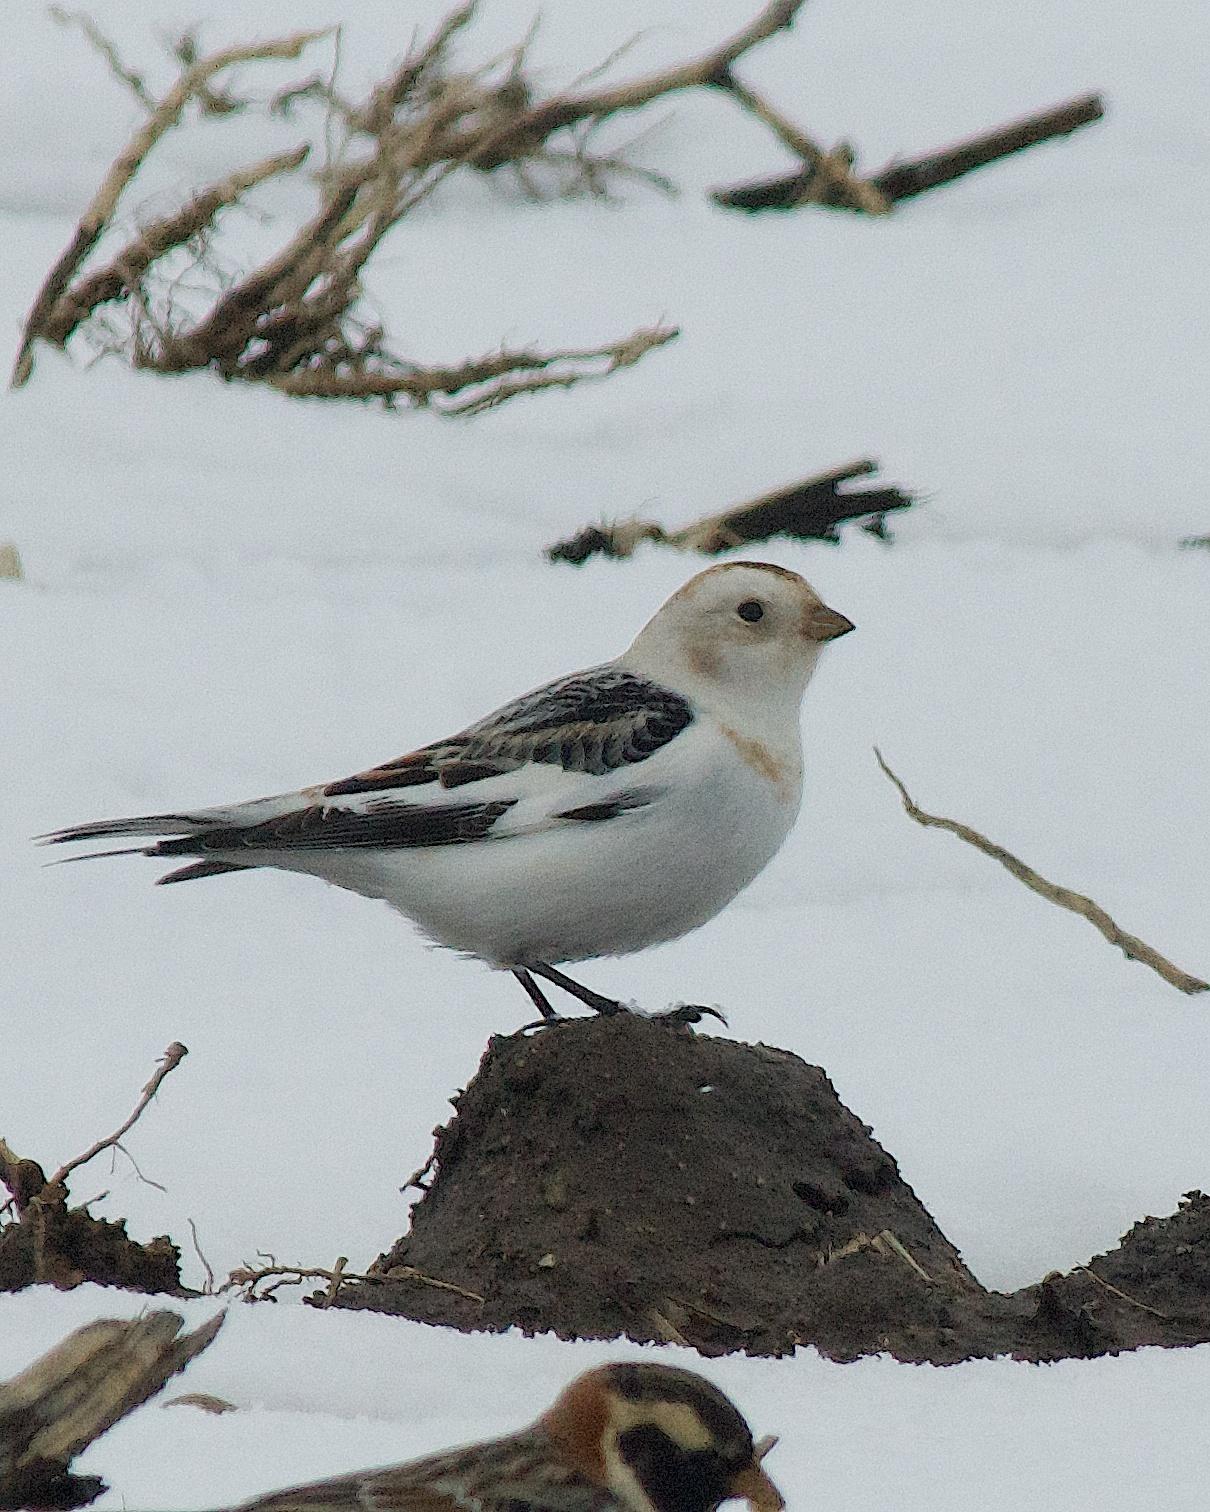 Snow Bunting Photo by Gerald Hoekstra